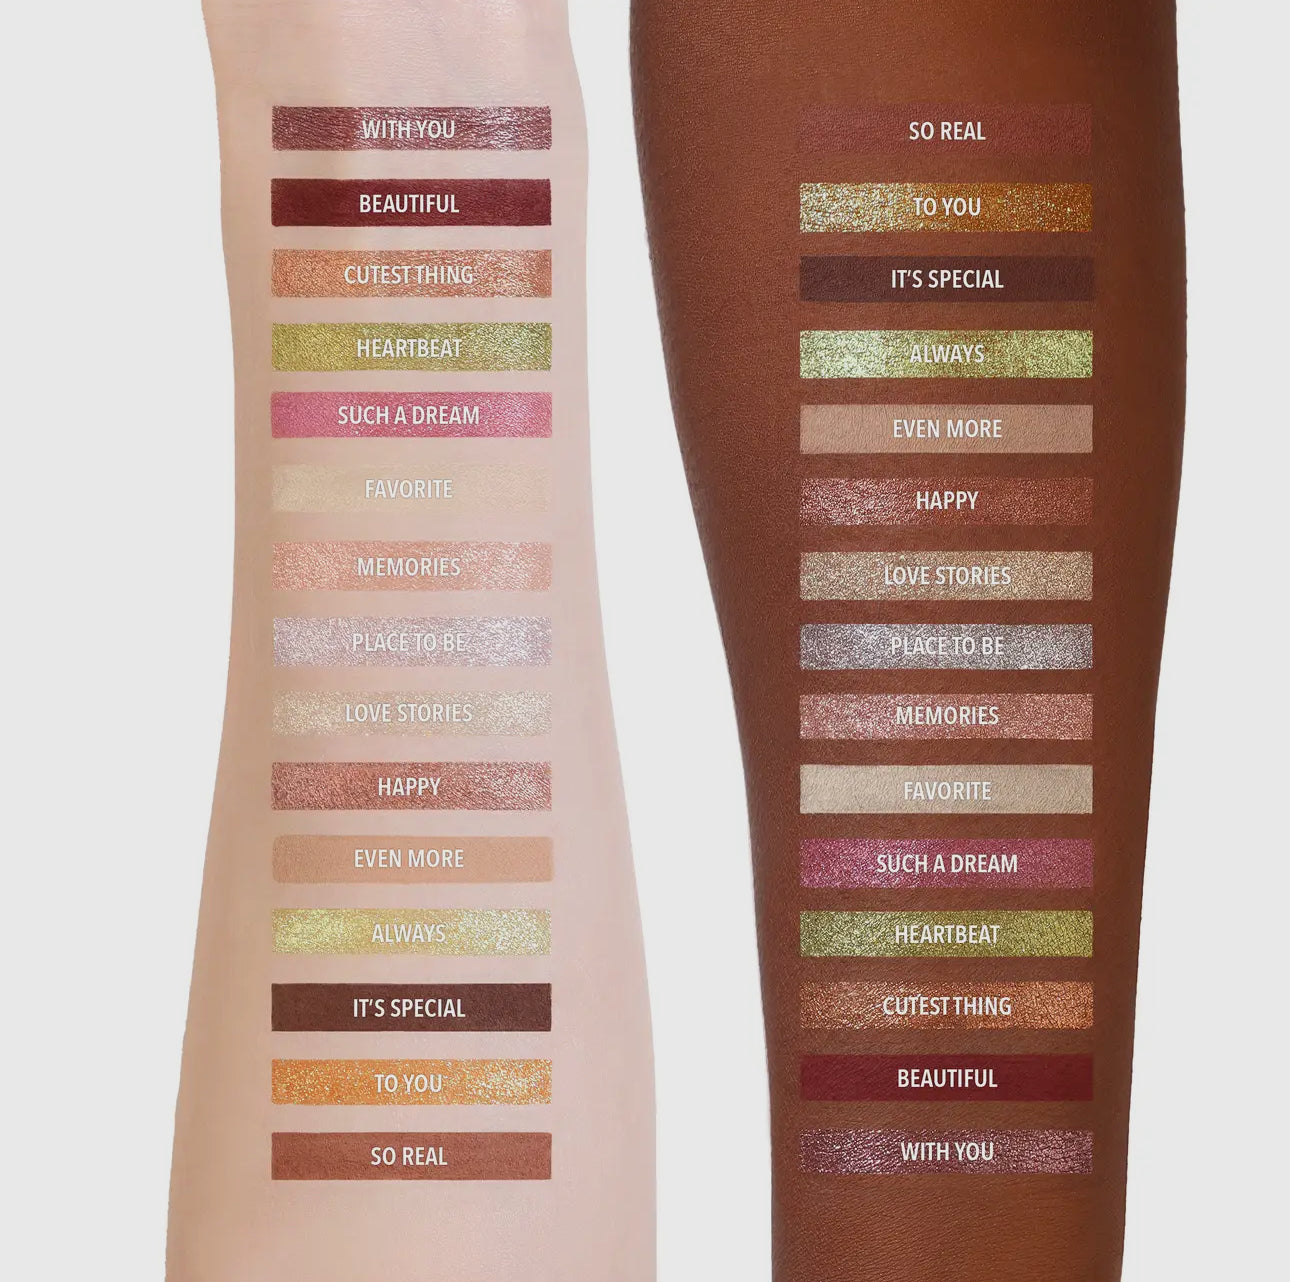 A Moment With You Eye Shadow Palette